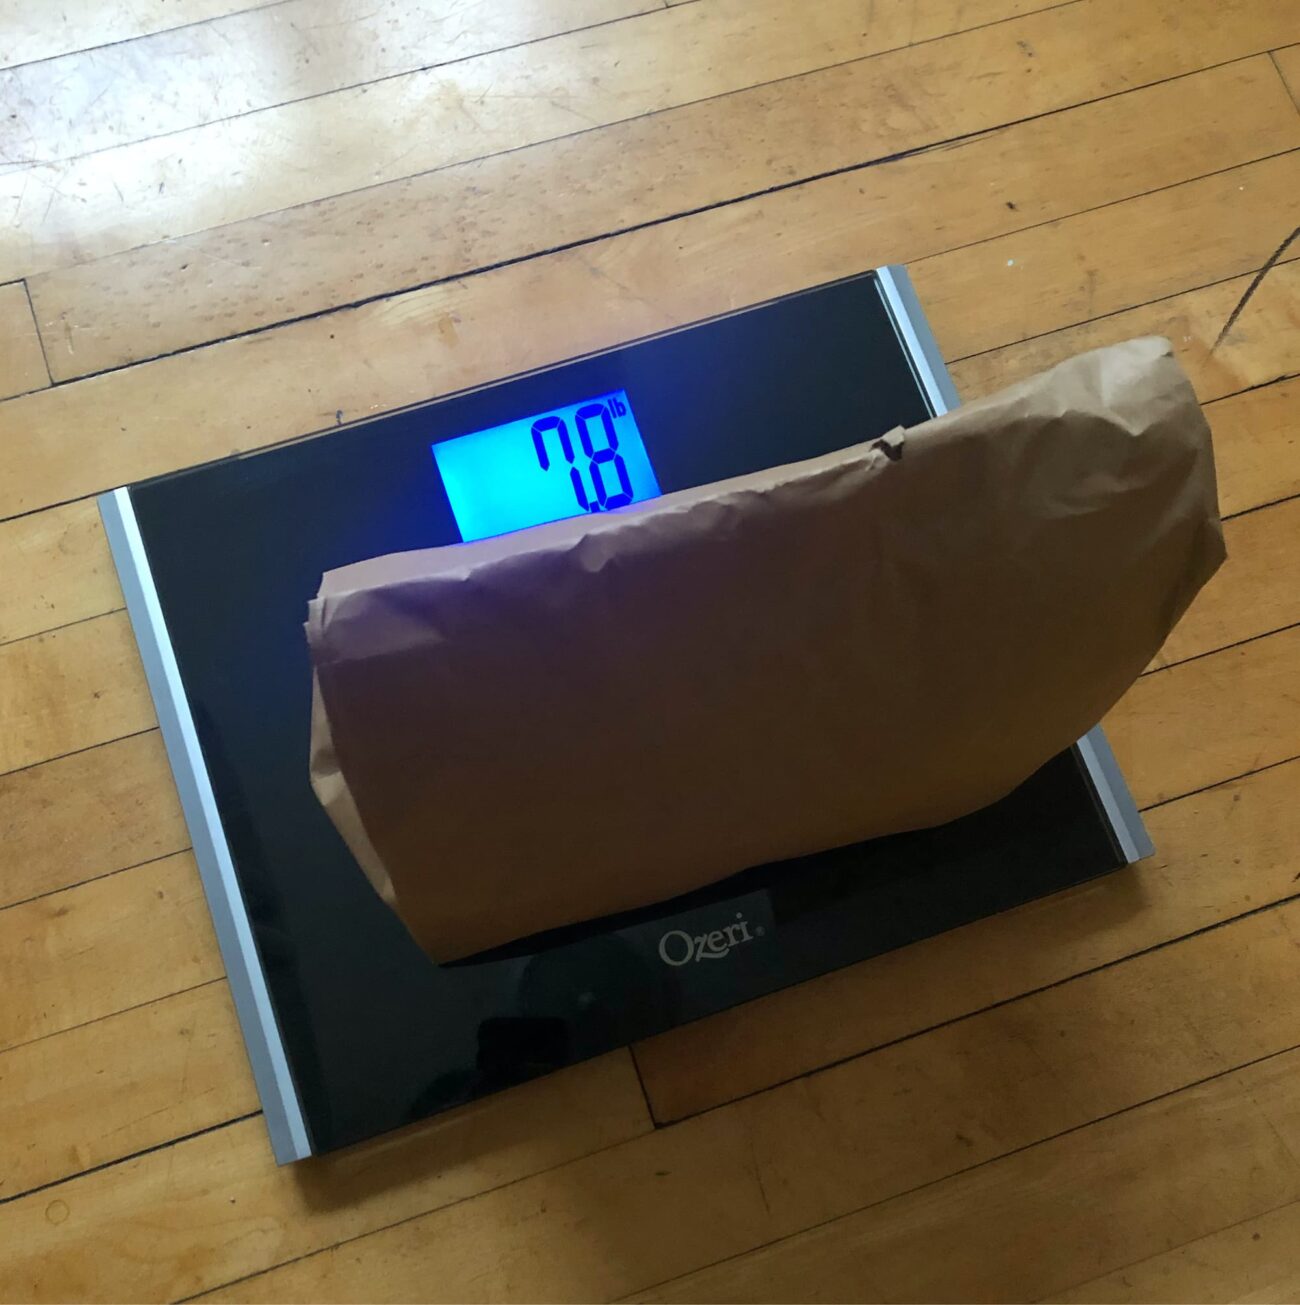 Half full brown paper bag sitting on bathroom scale. Scale reads 7.8lbs.